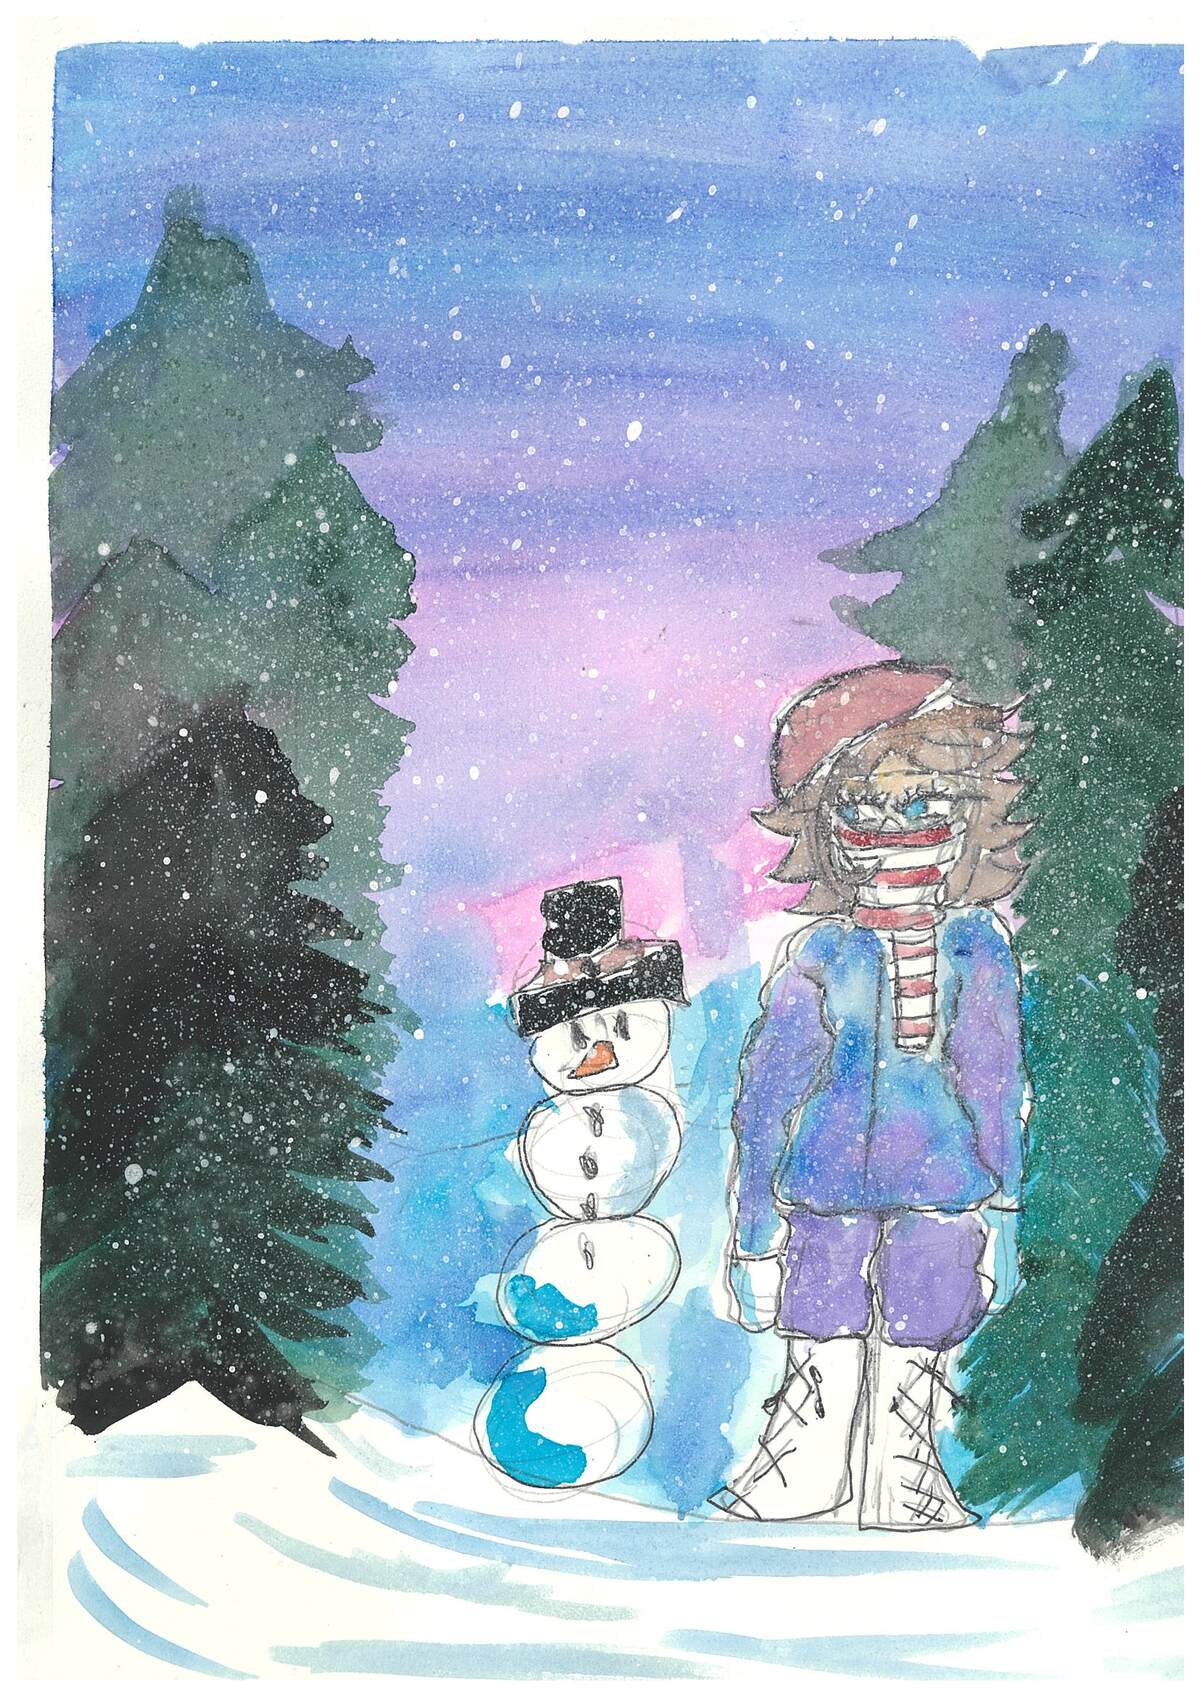 Painting of a person wearing a scarf next to a snowman outside.